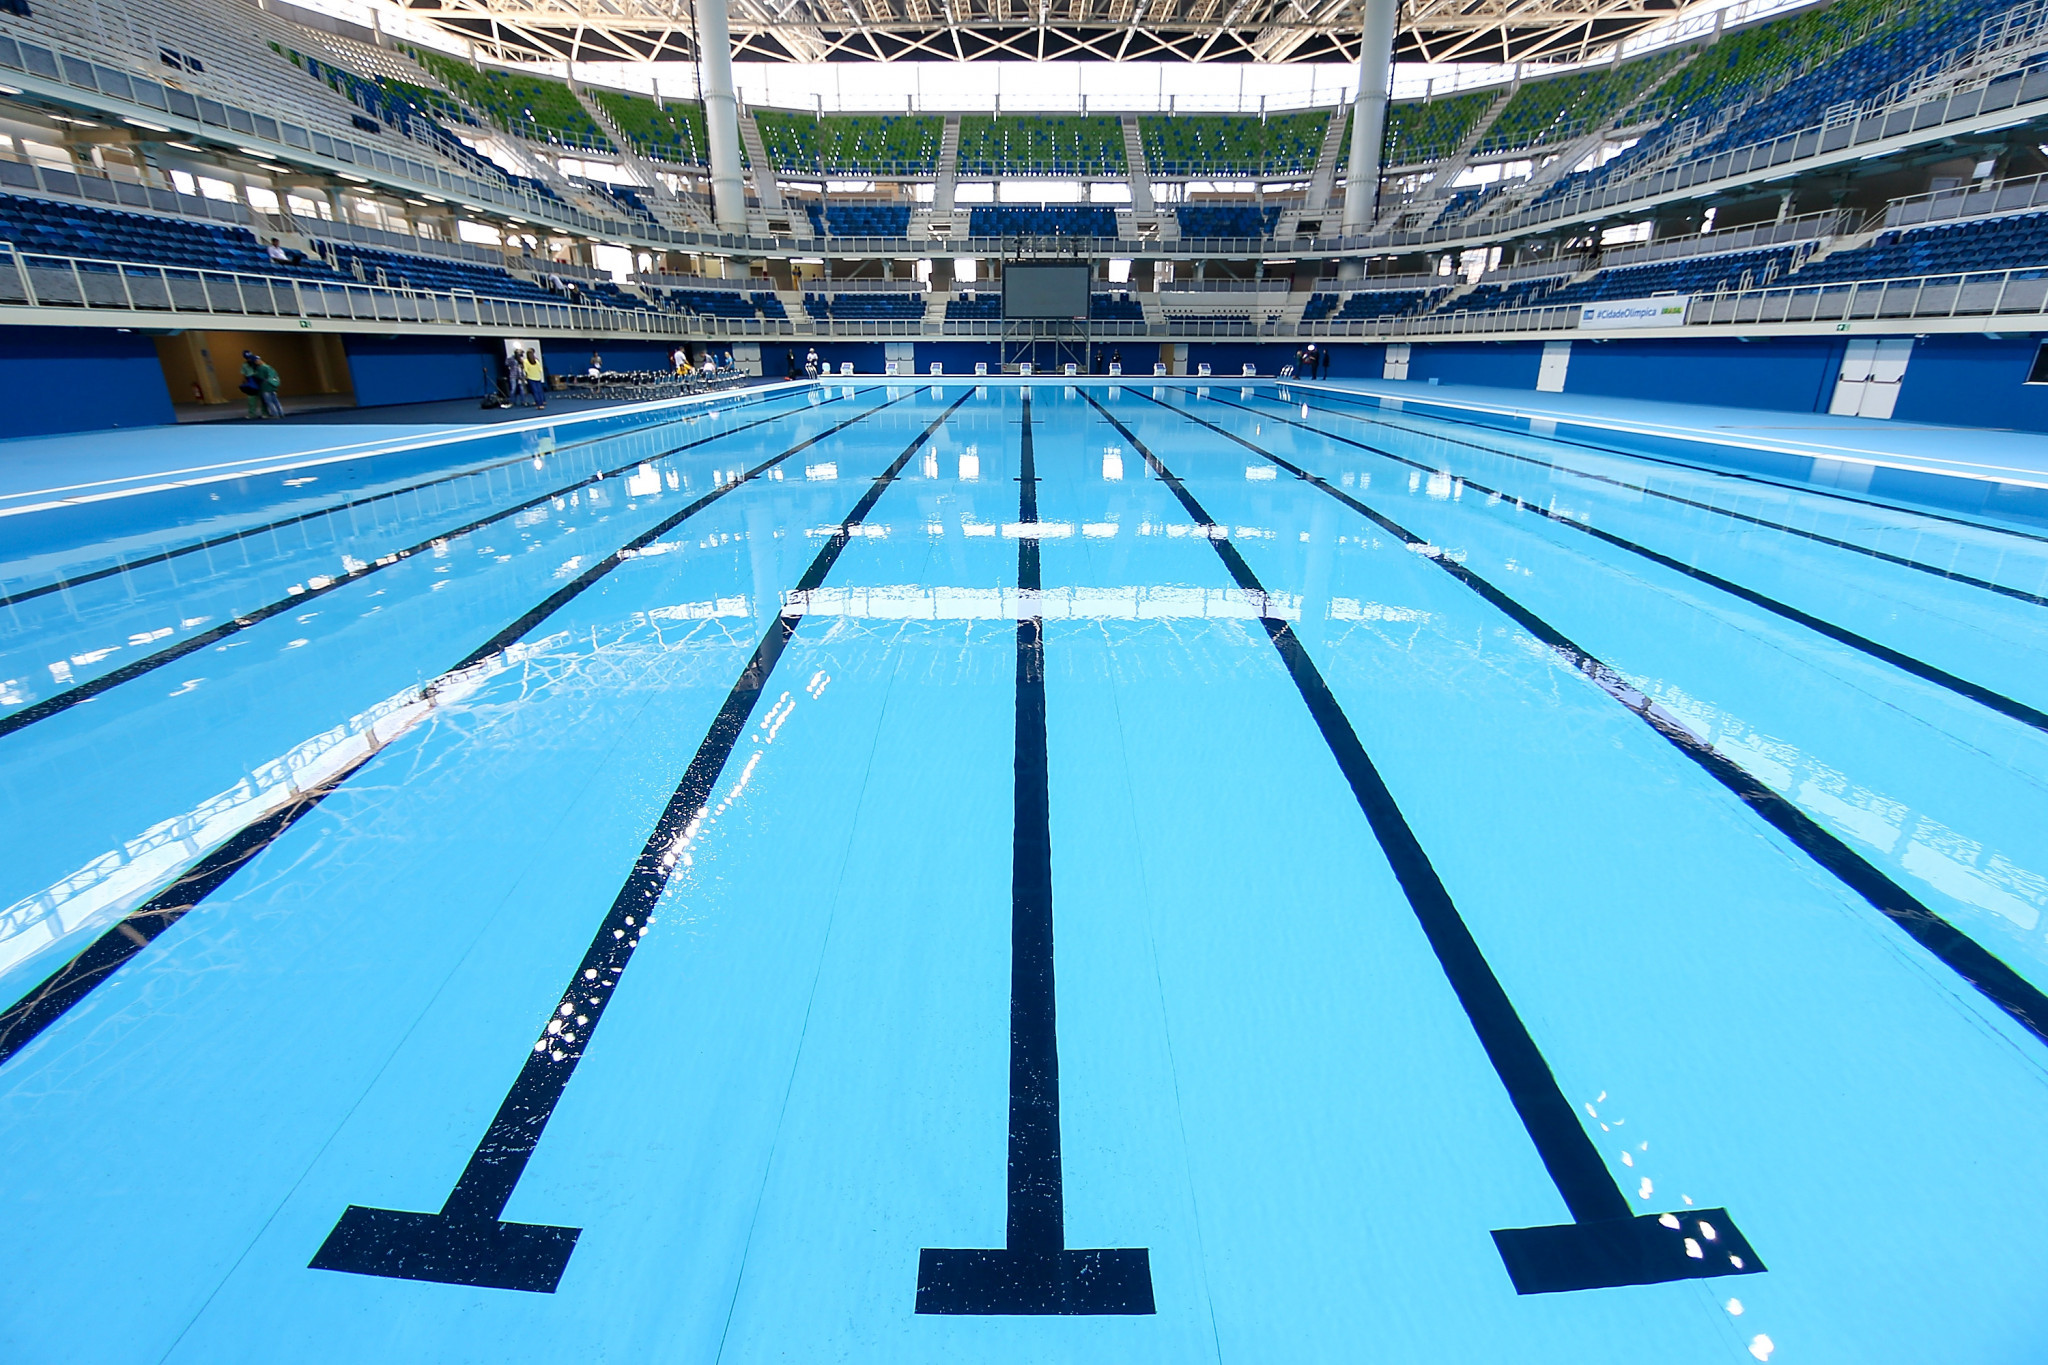 Aquatics is the 25th sport to be part of the 2023 European Games programme ©Getty Images